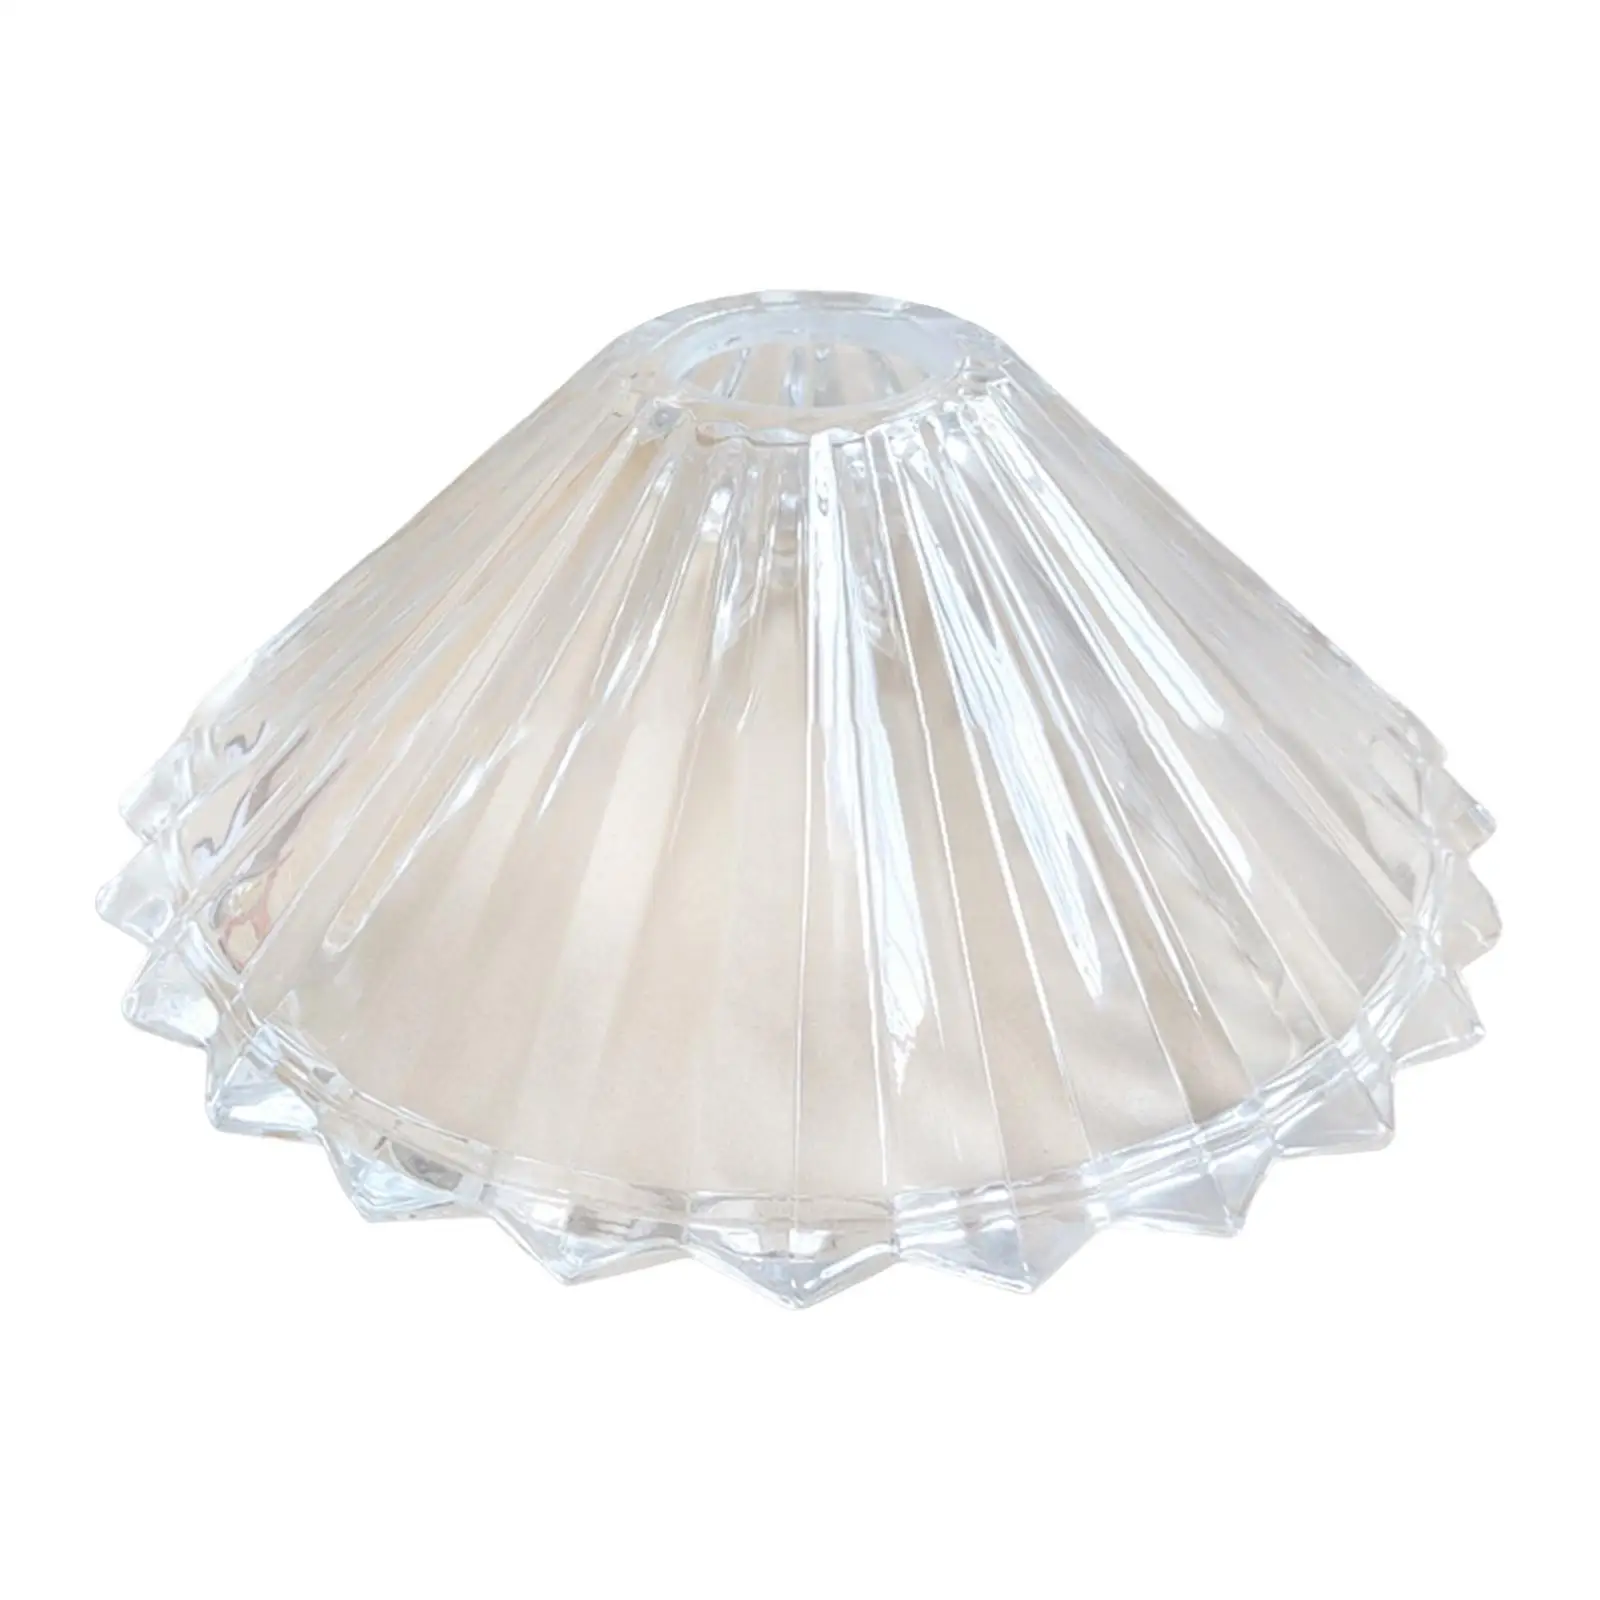 European Style Glass Lampshade Embossed Design Clear Sturdy Glass Lights Covers